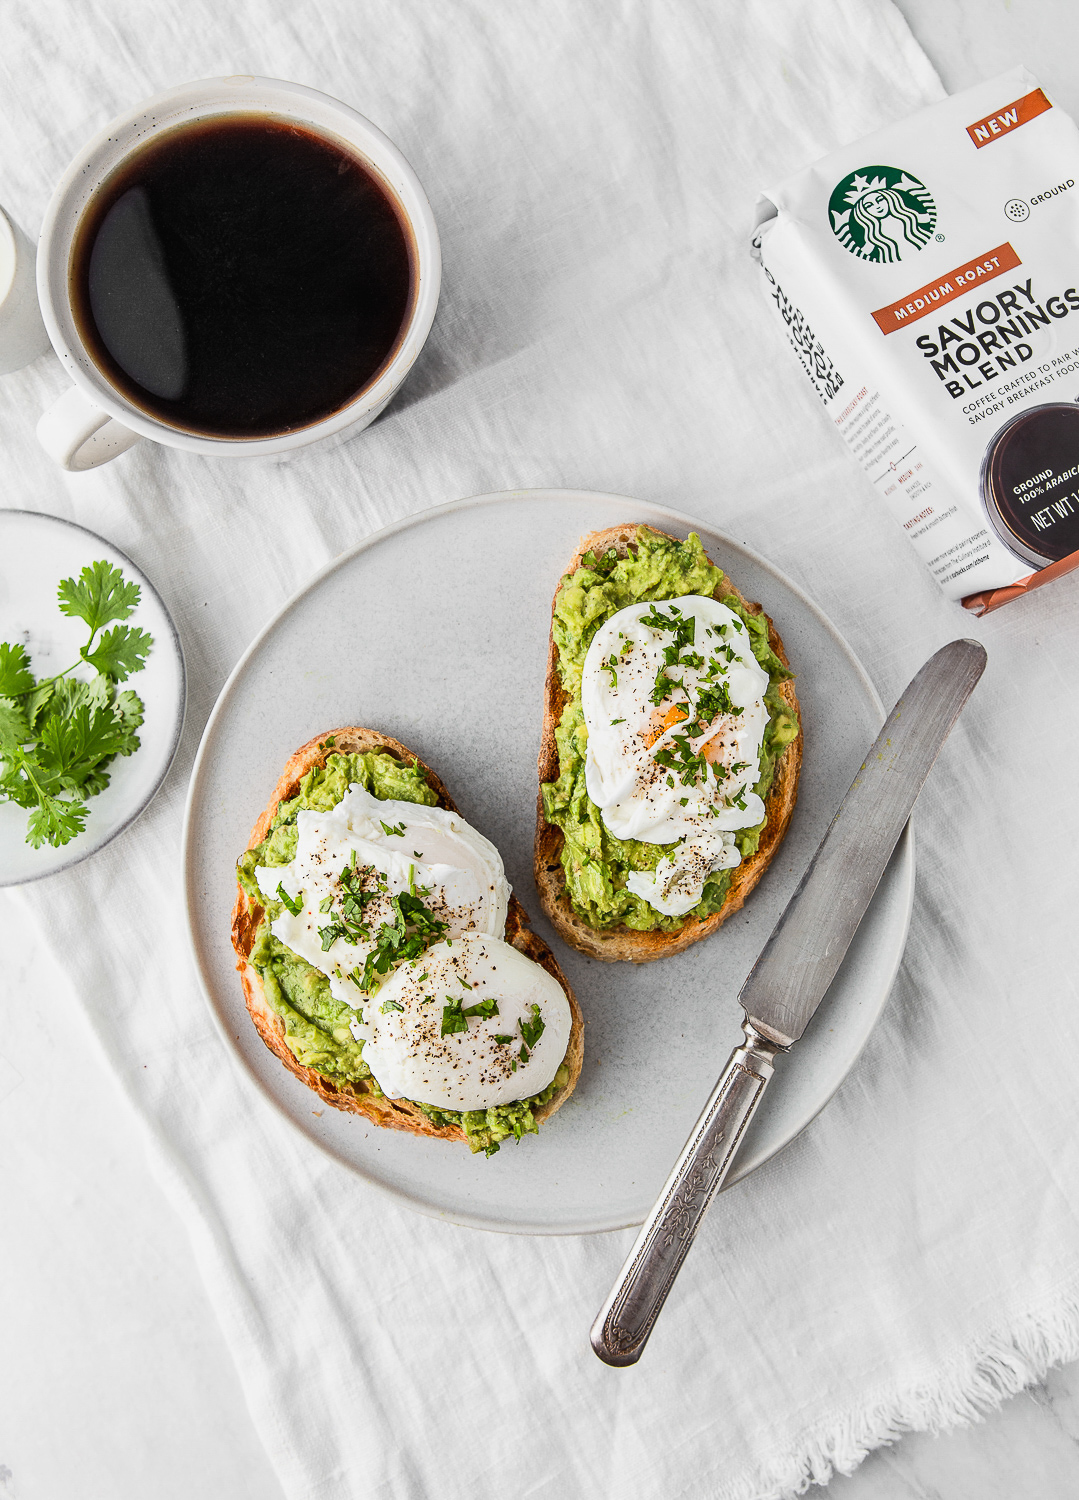 mashed avocado and poached eggs toasts on a plate with a cup of starbucks coffee photography